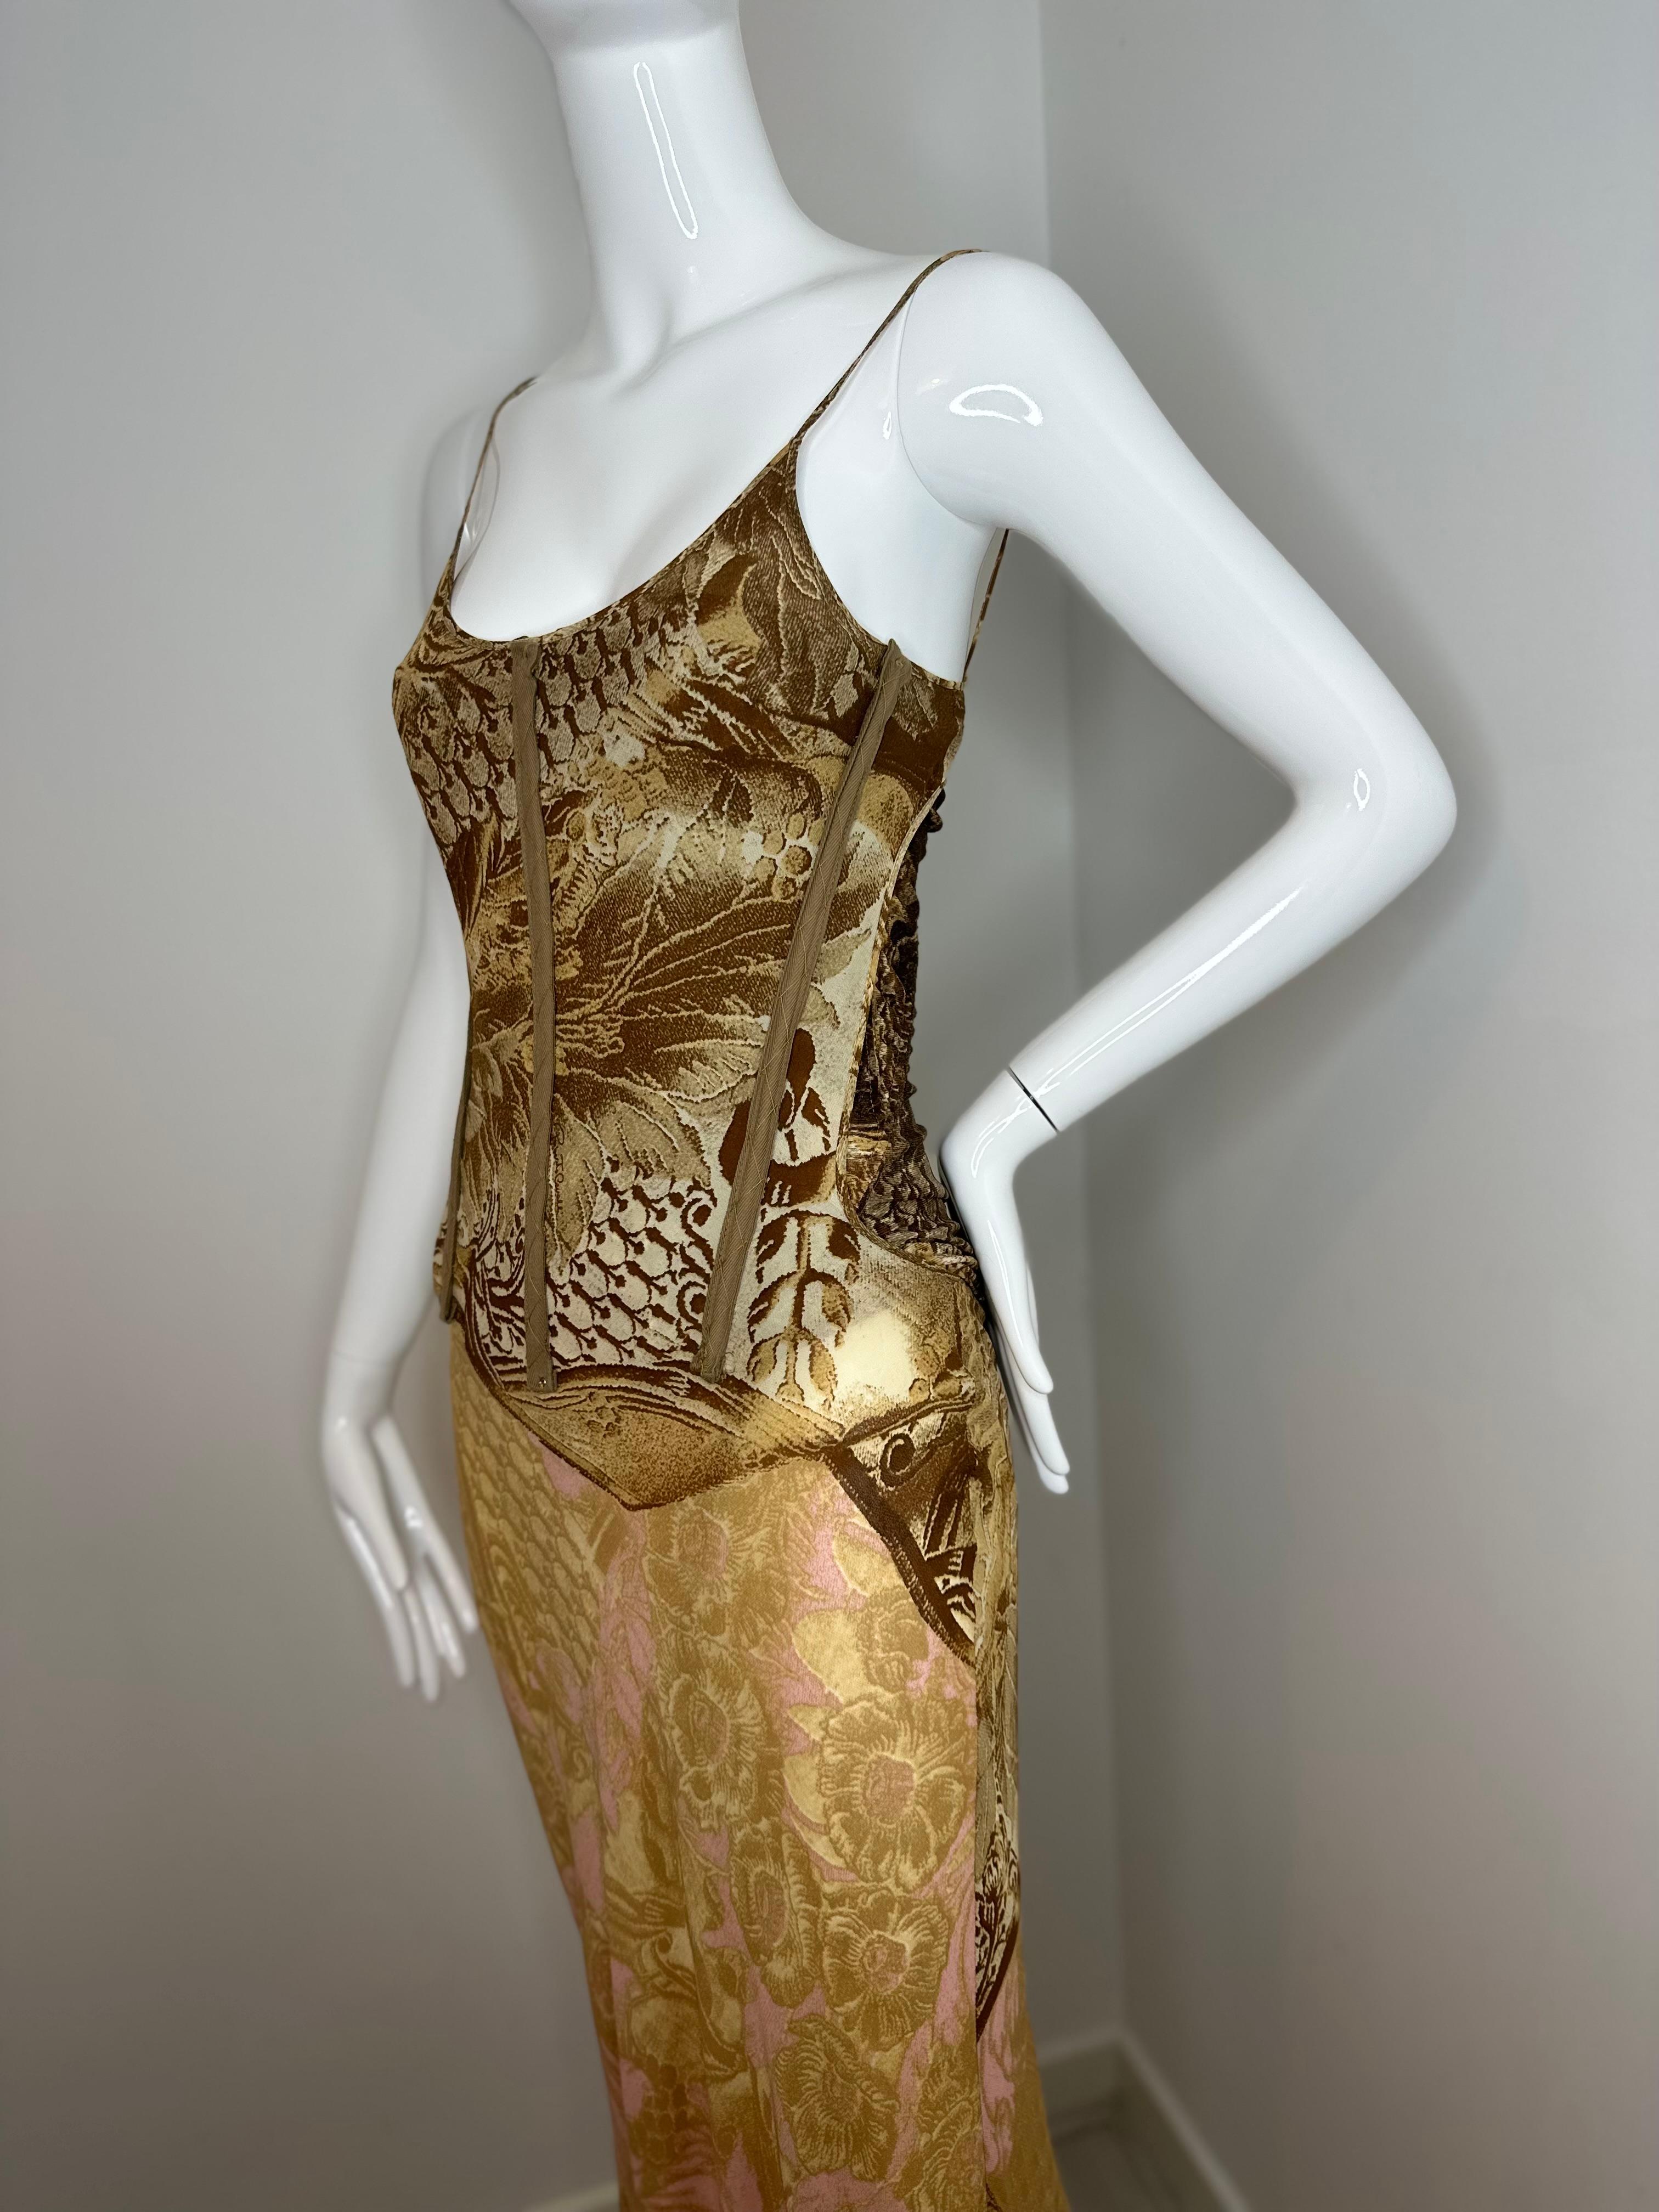 Roberto Cavalli 2001 runway maxi dress
Integrated corset with a zipper in the back 
Look 8

Size S

Small hook in the back giving you an option to wear with or without the train
Good vintage condition, no material label